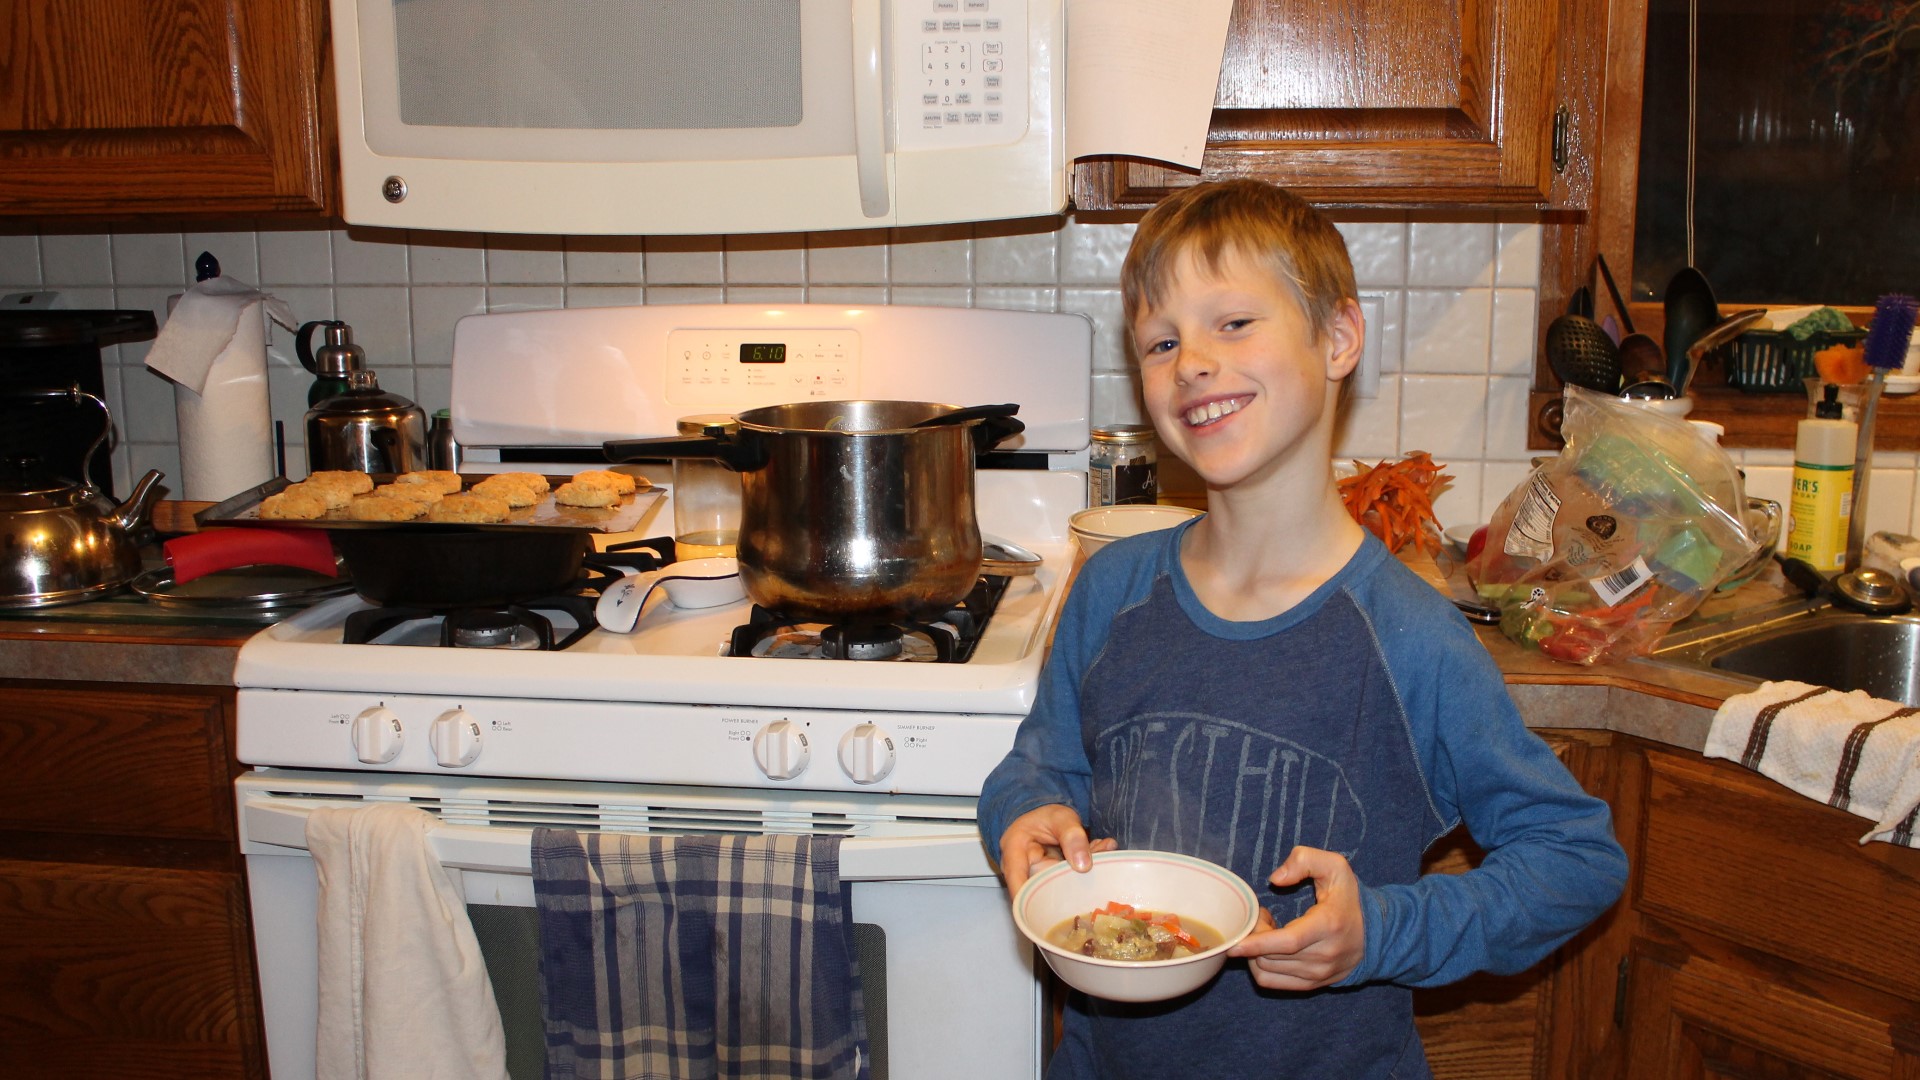 Paul Kimbell, 15, has been cooking with his family for years and now he's sharing that passion through 'Chef Junior' -- a cookbook he put together with 4 other teens